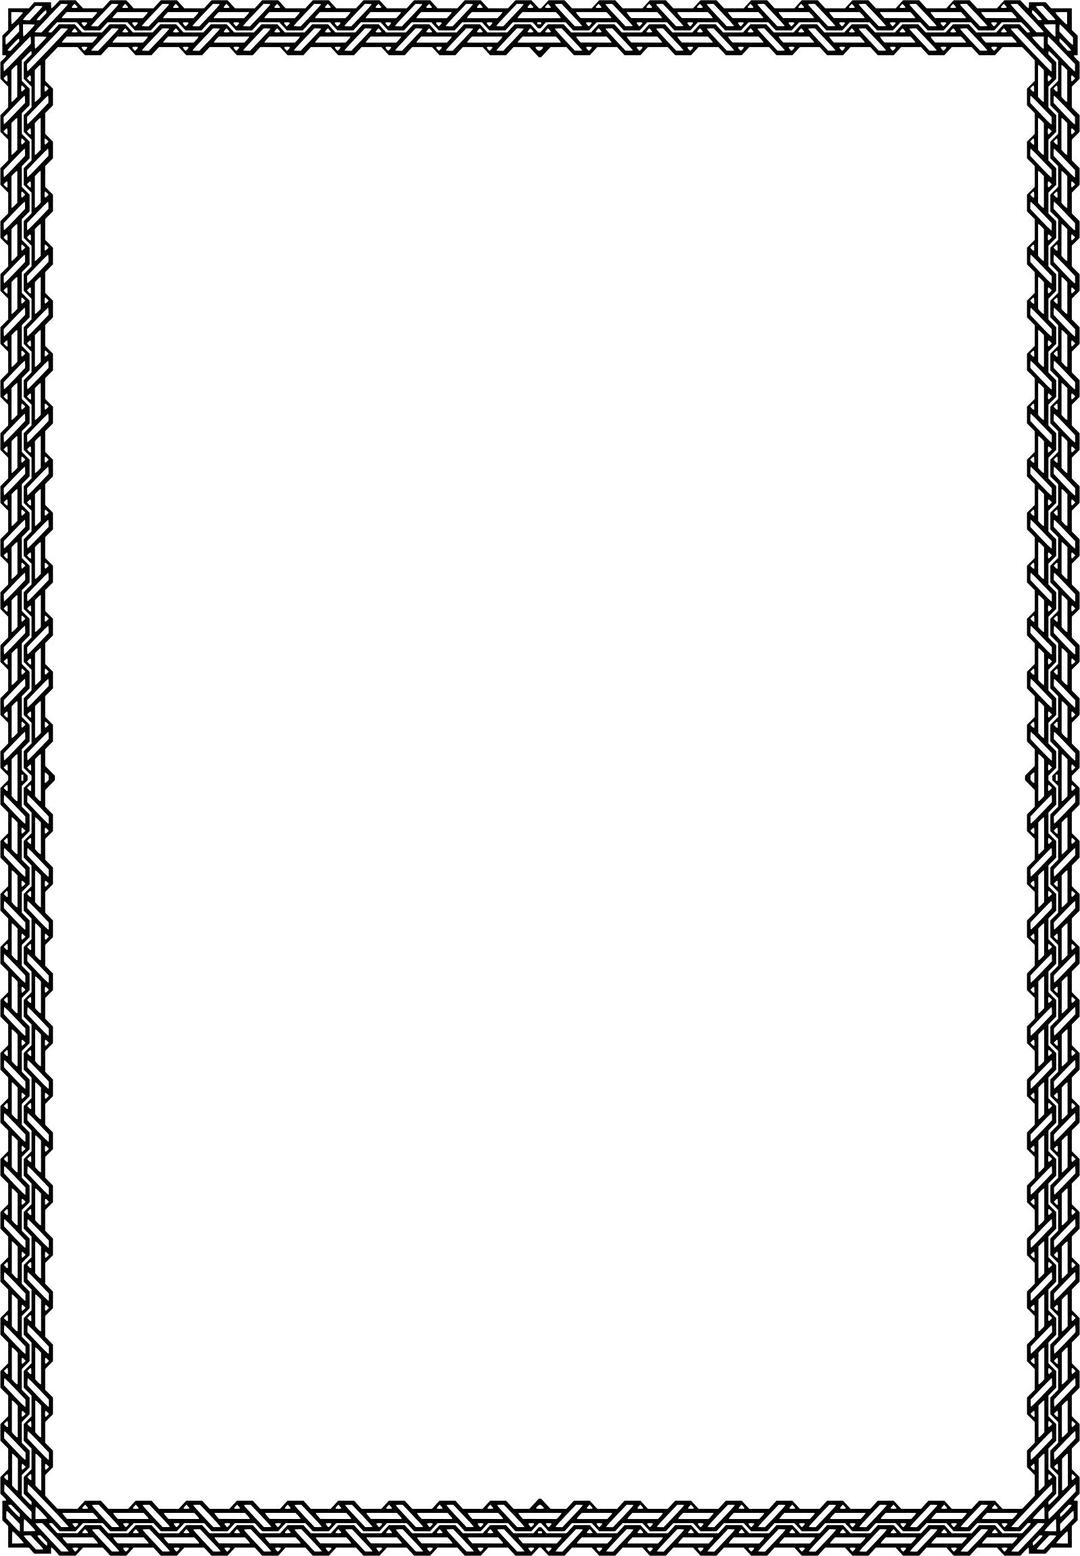 Wicker Weave (A4 size) png transparent